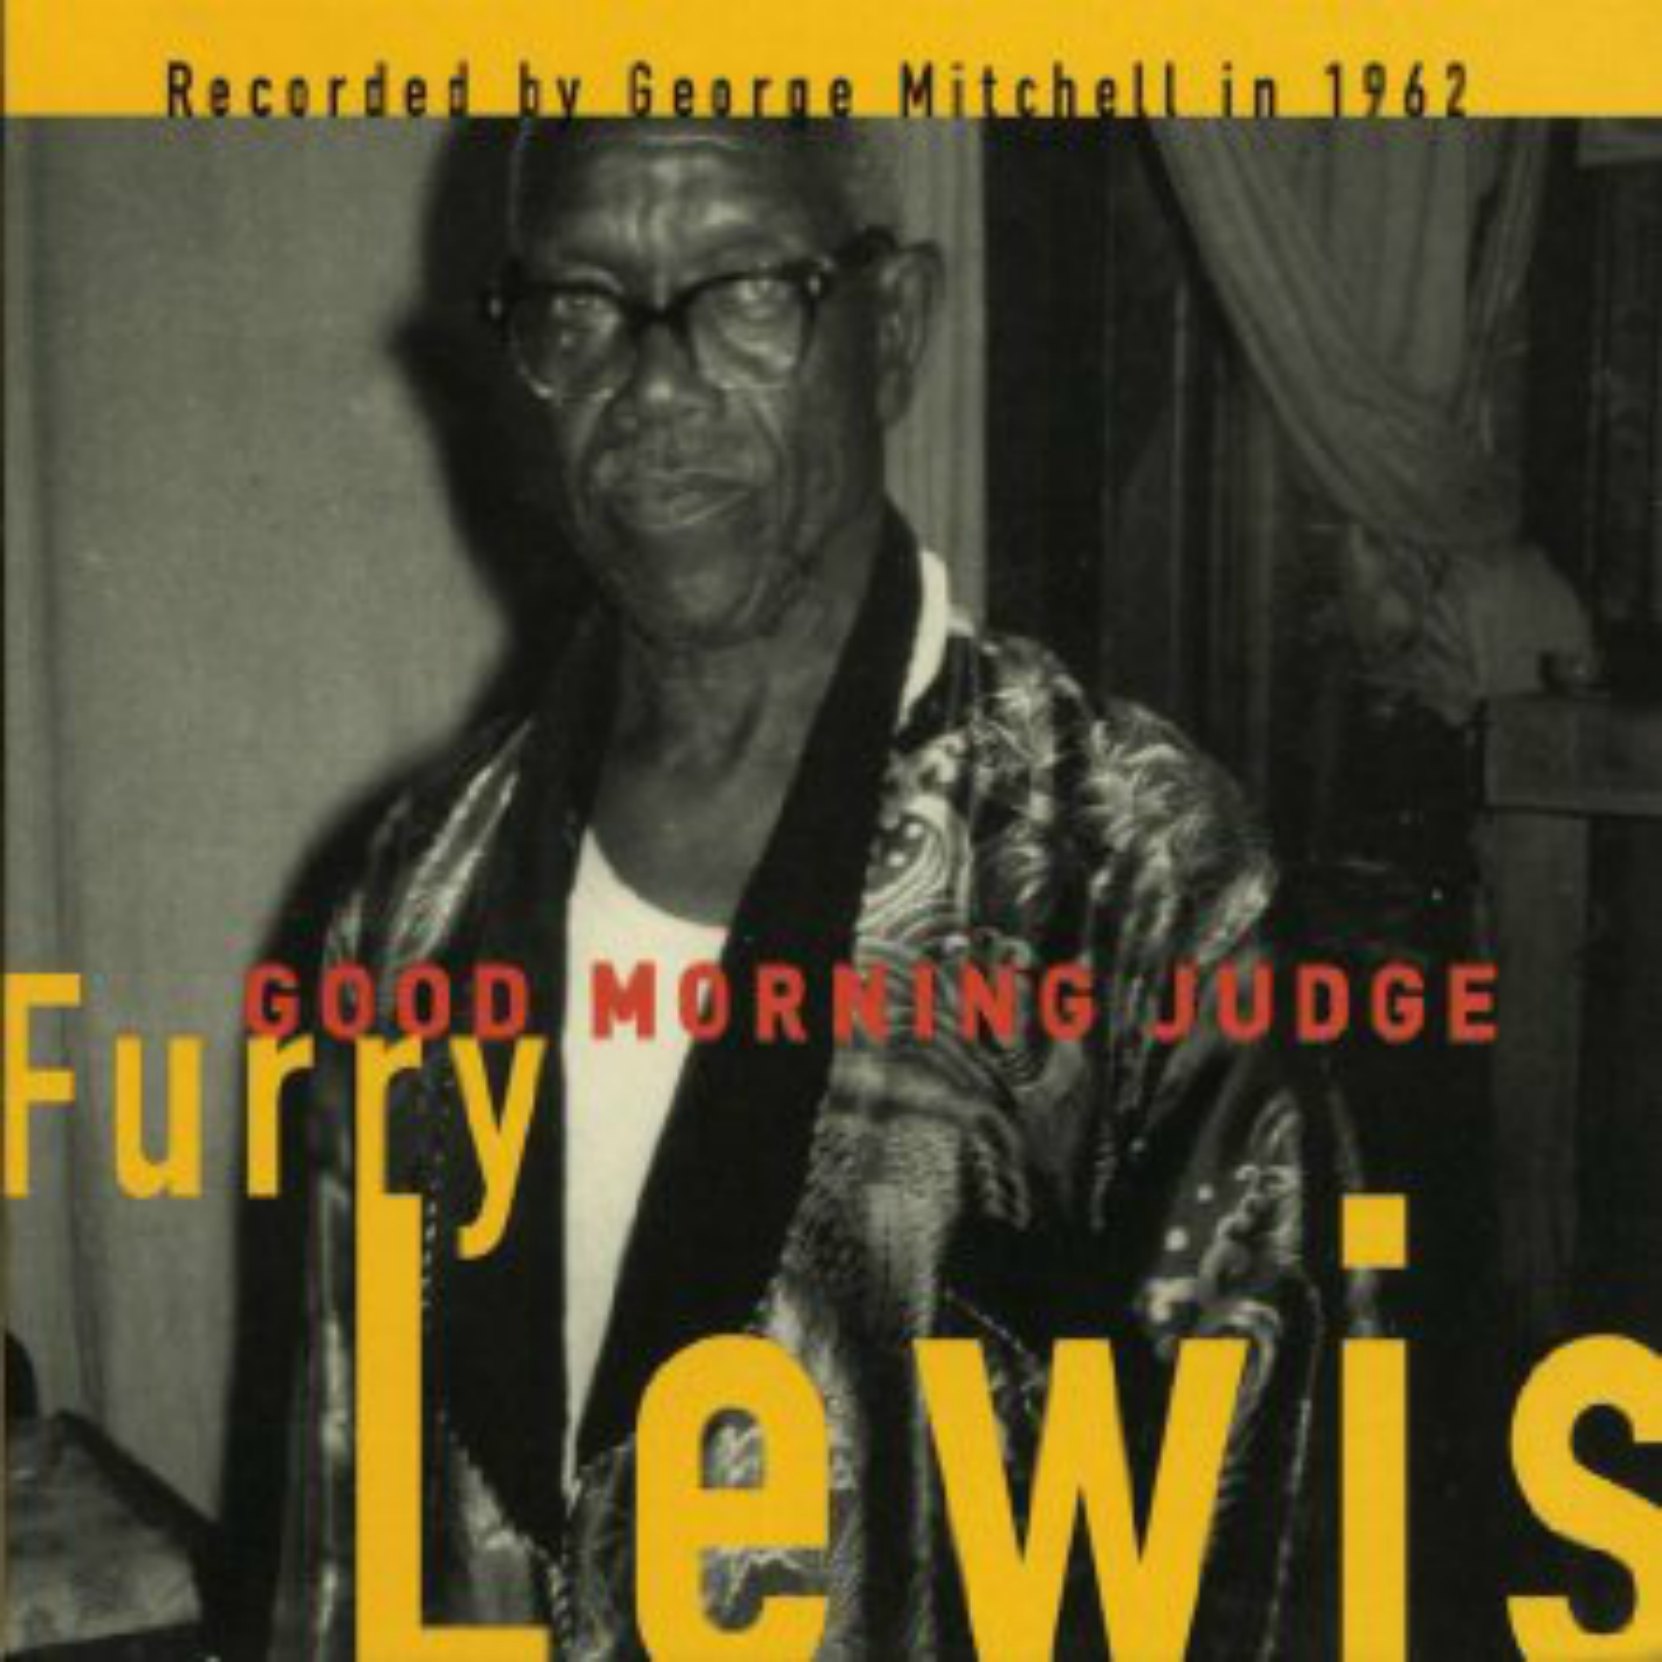 CD cover, Good Morning Judge by Furry Lewis, recorded in 1962 by George Mitchell